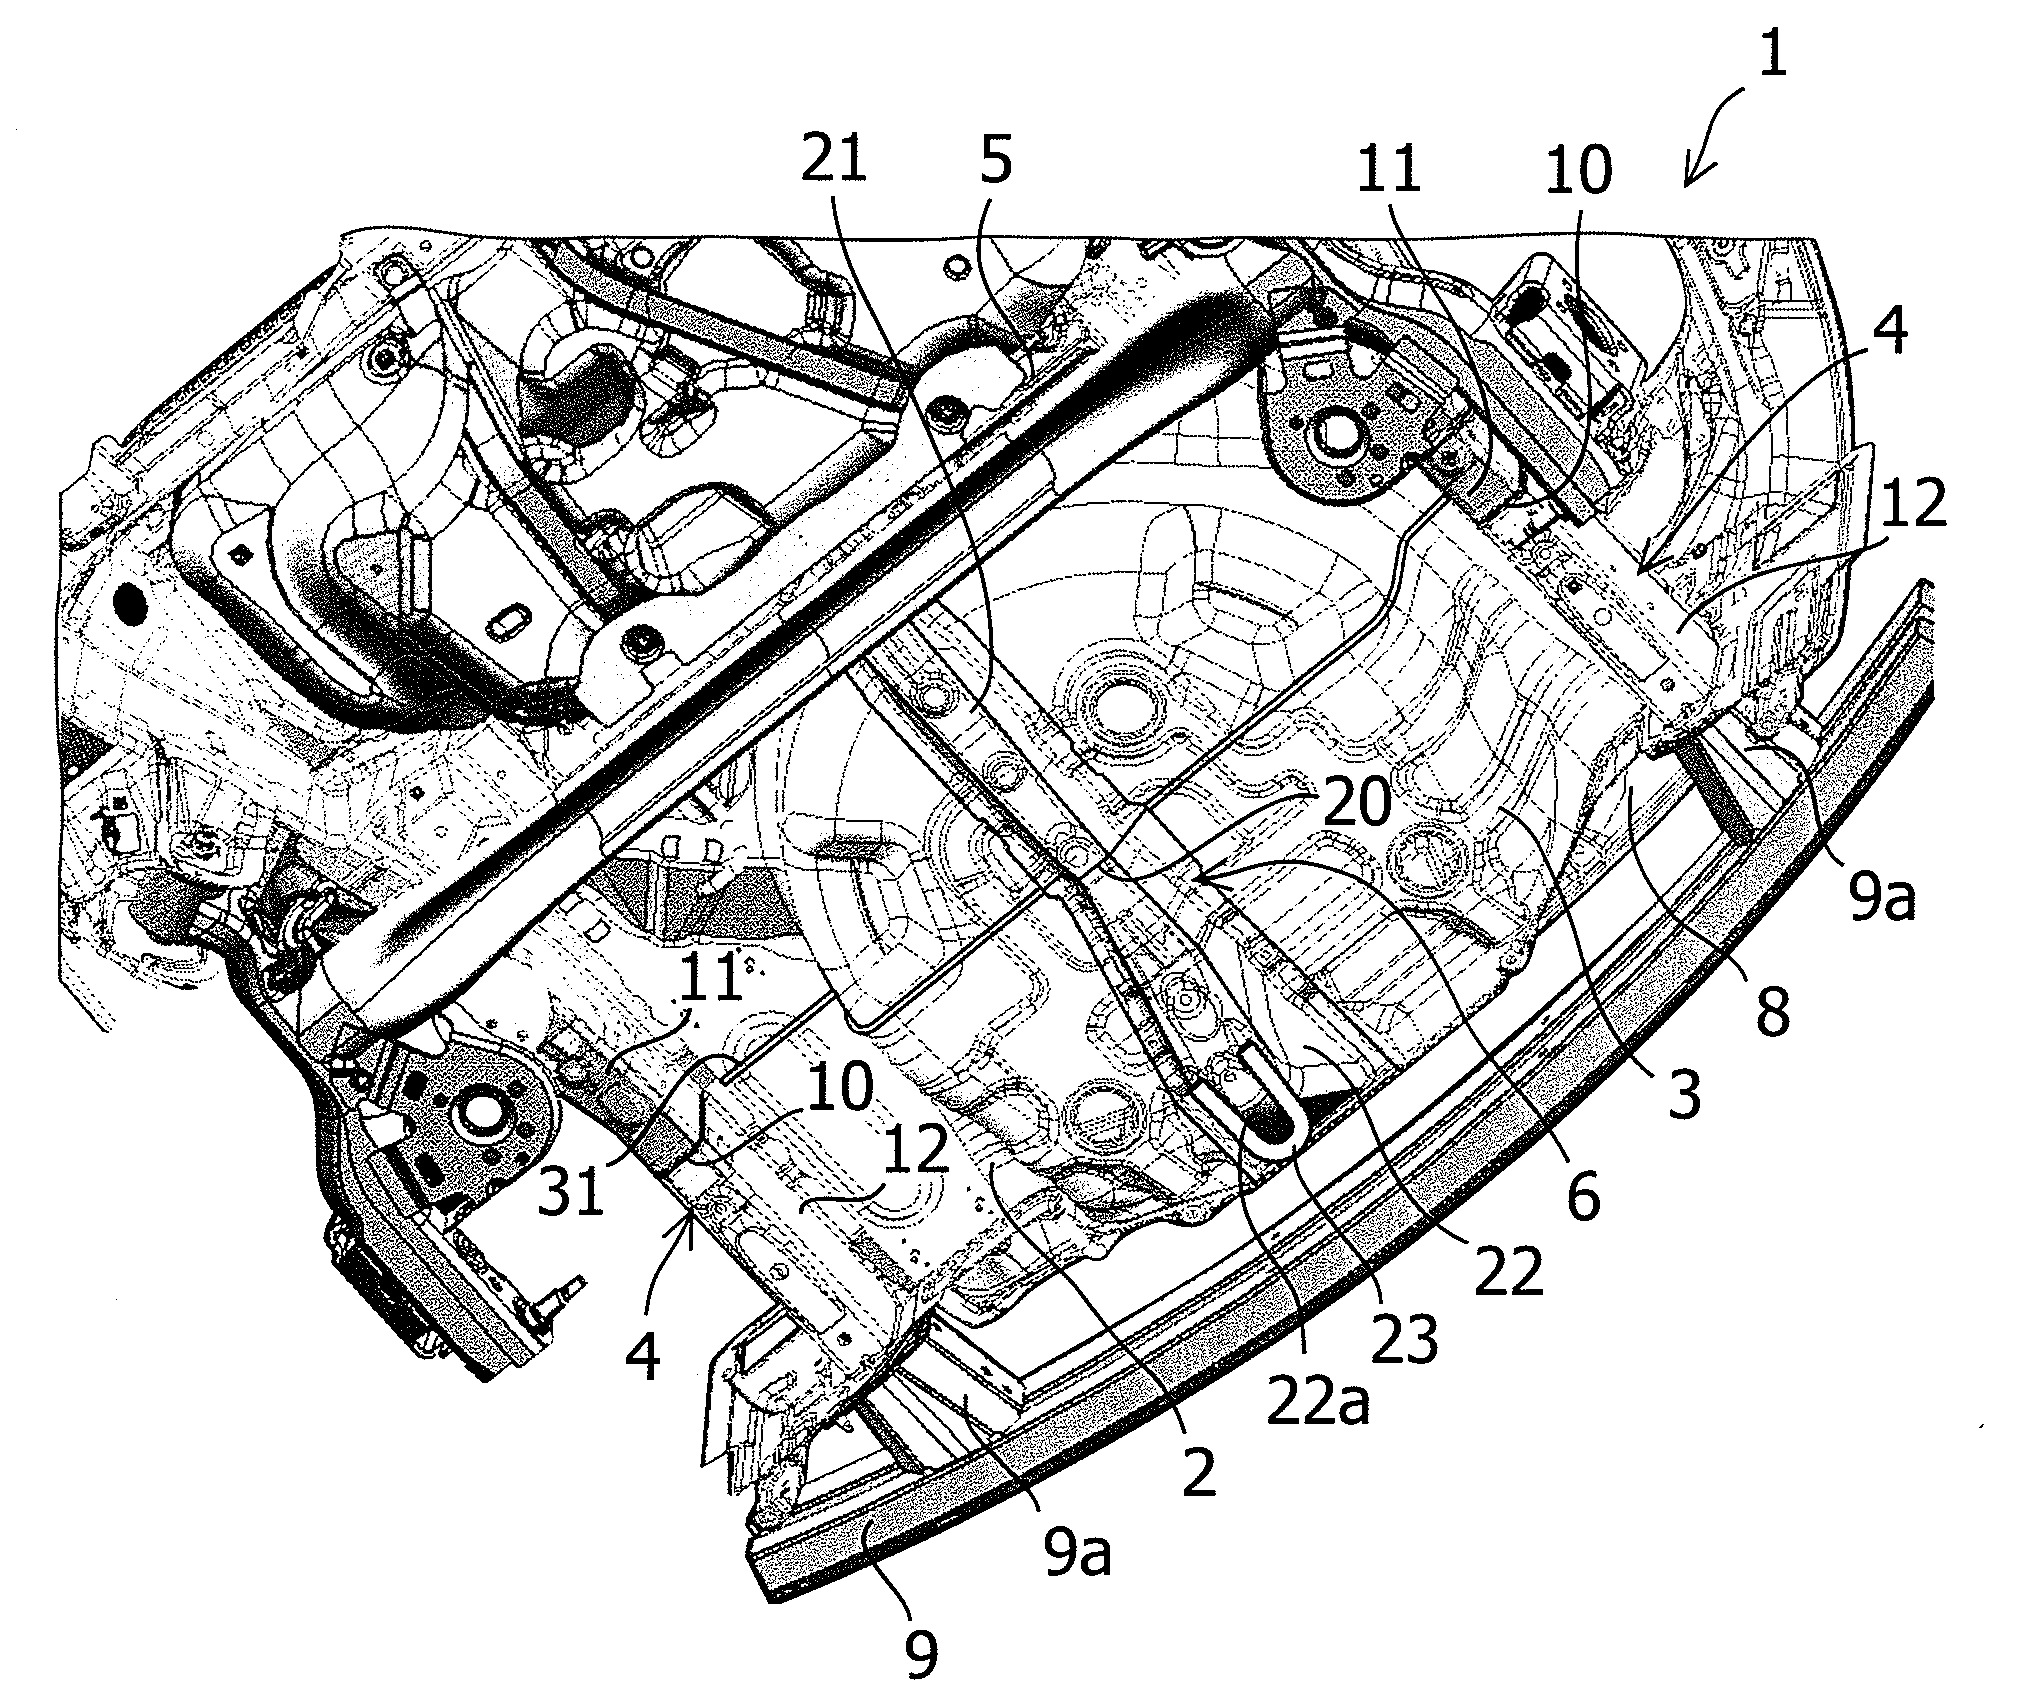 Lower Structure of Vehicle Body Rear Part